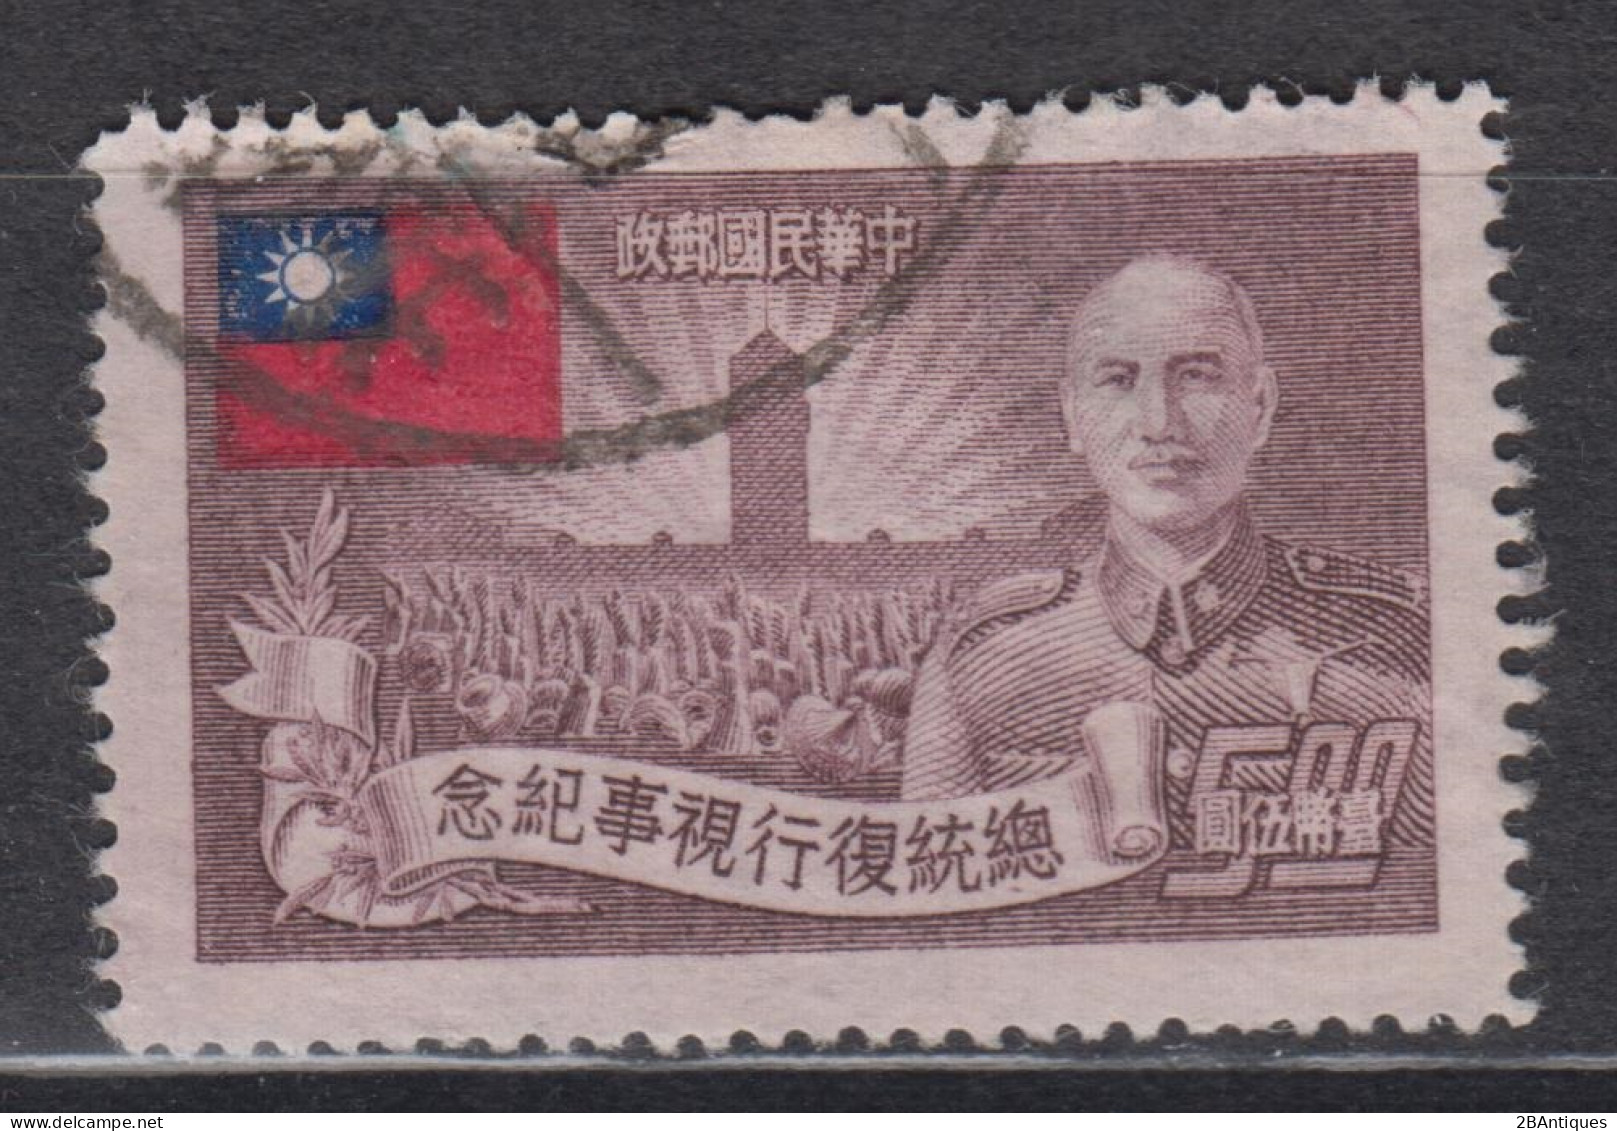 TAIWAN 1953 - The 3rd Anniversary Of Re-election Of President Chiang Kai-shek KEY VALUE! - Oblitérés